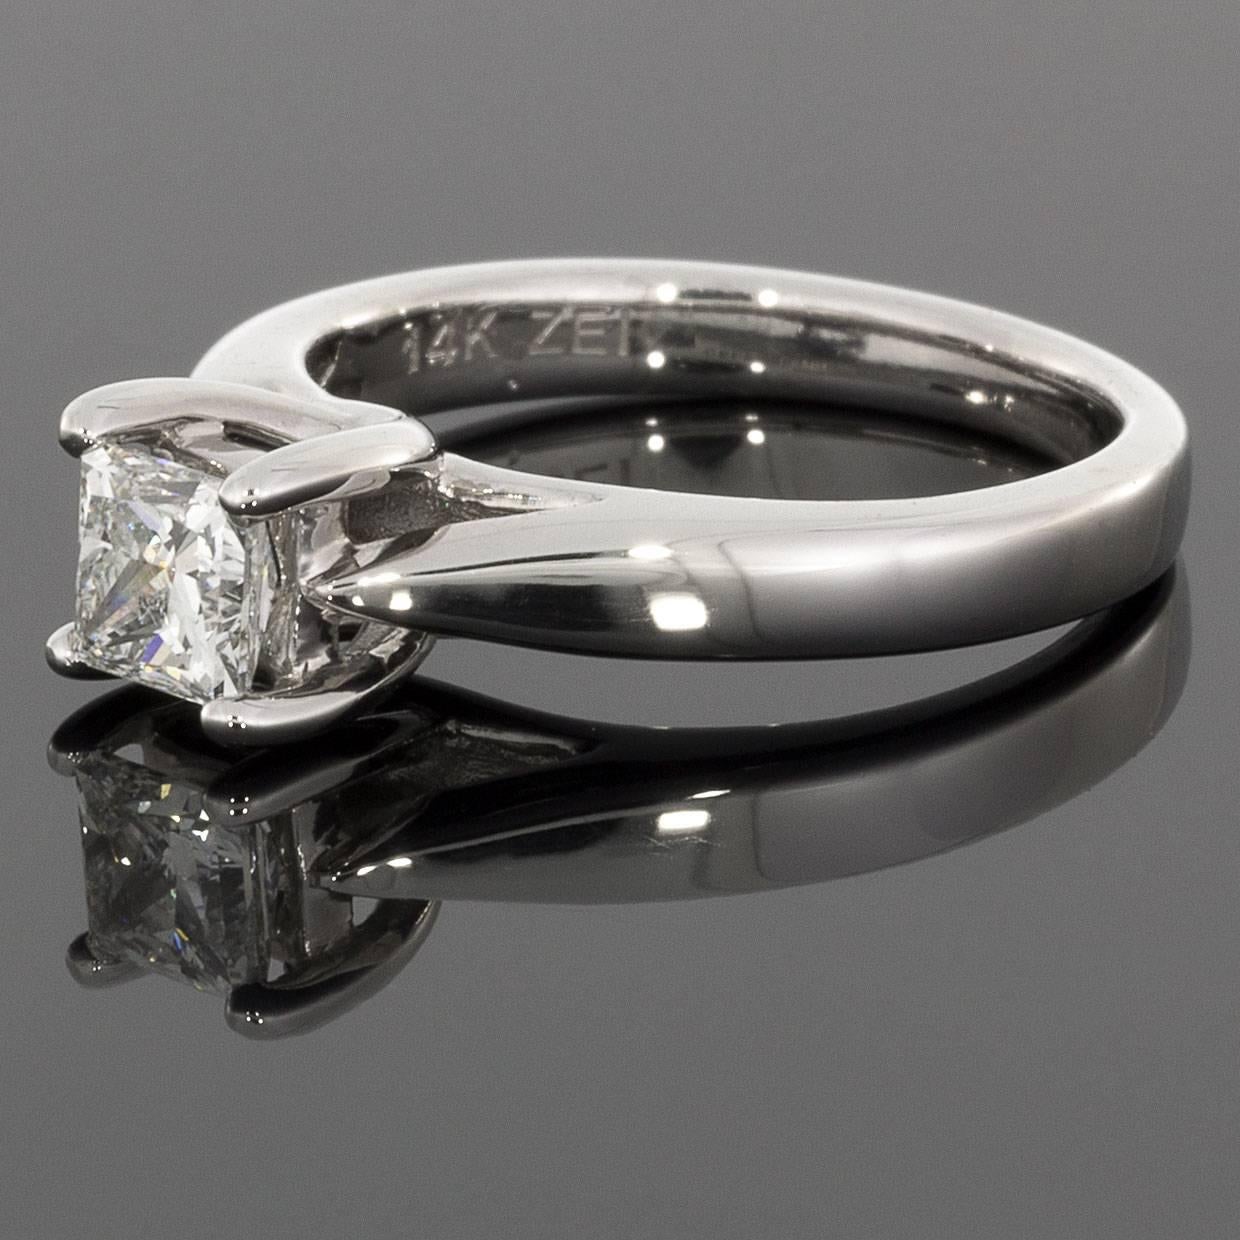 This beautiful Celebration Grand diamond engagement ring features a sparkly, brilliant princess cut diamond. This diamond weighs .50 carat & is GSL certified as G/I1 in quality. This amazing diamond is also certified ideal cut with a Light Trace